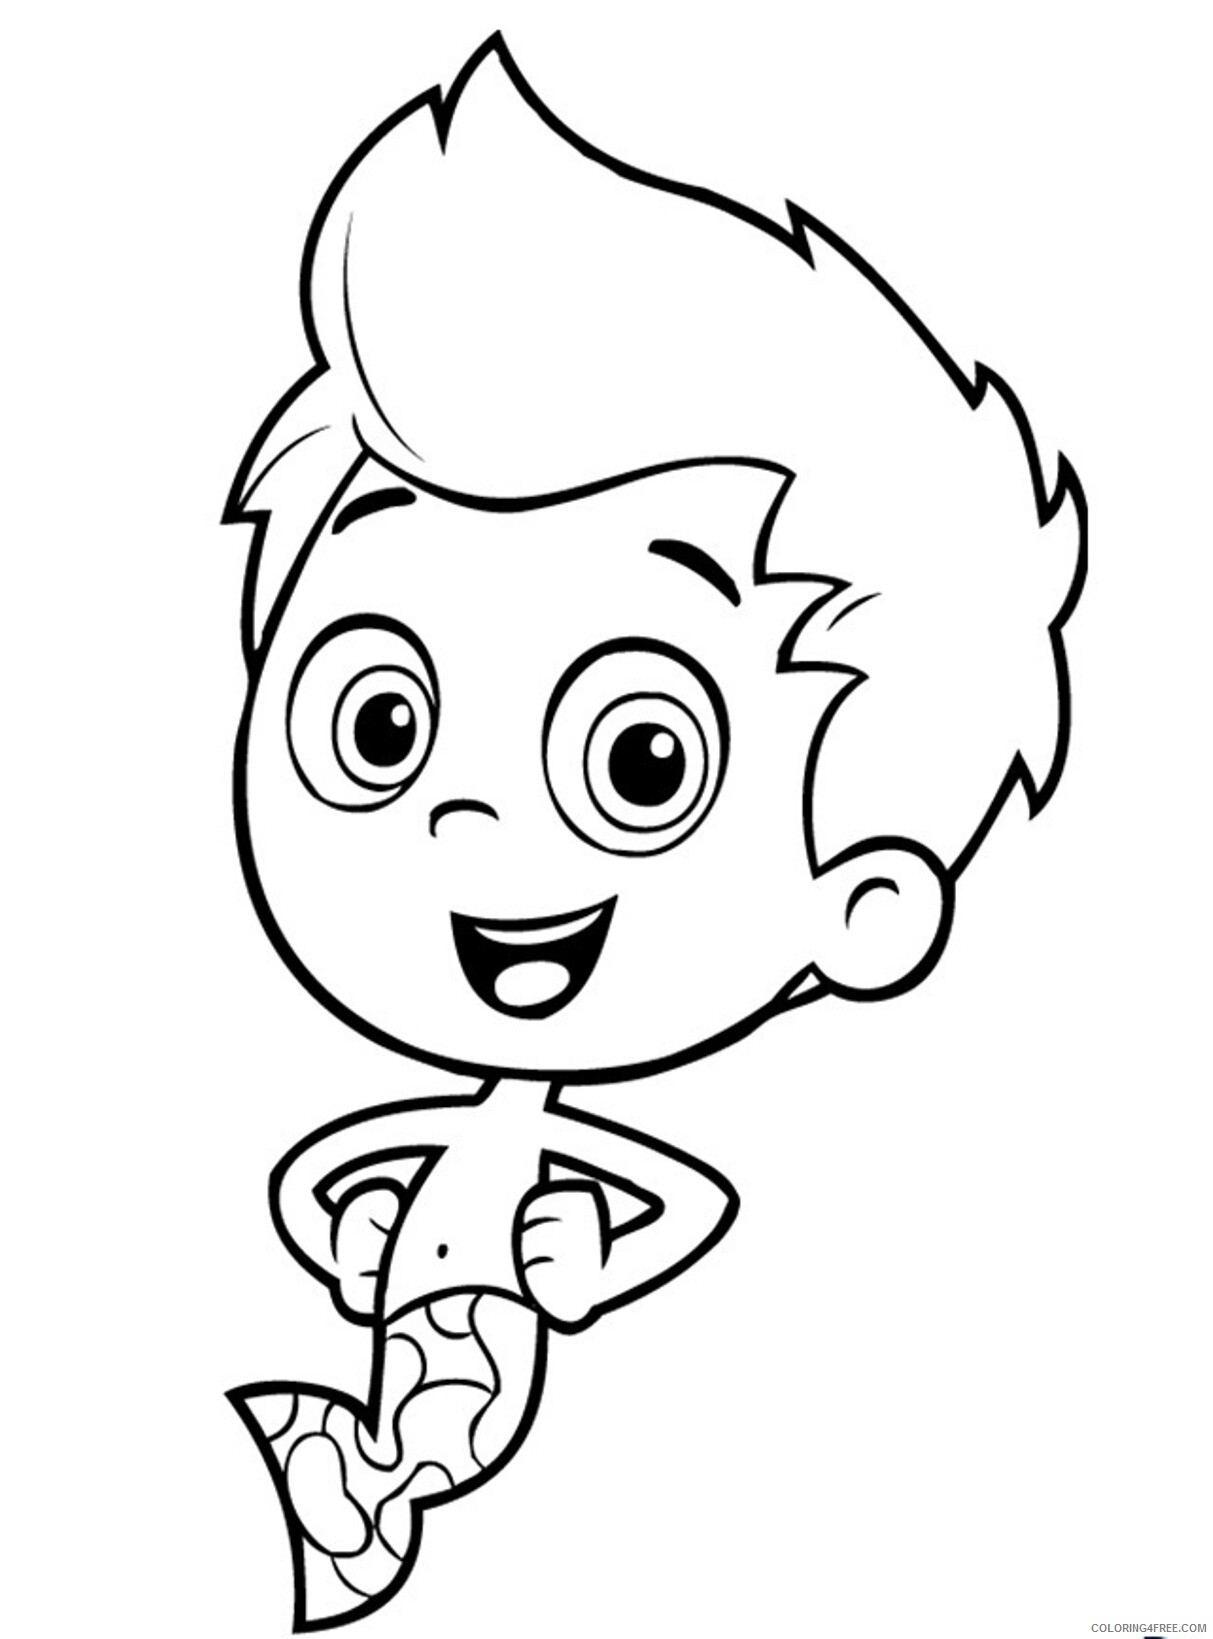 Bubble Guppies Coloring Pages TV Film Bubble Guppiess Printable 2020 01630 Coloring4free